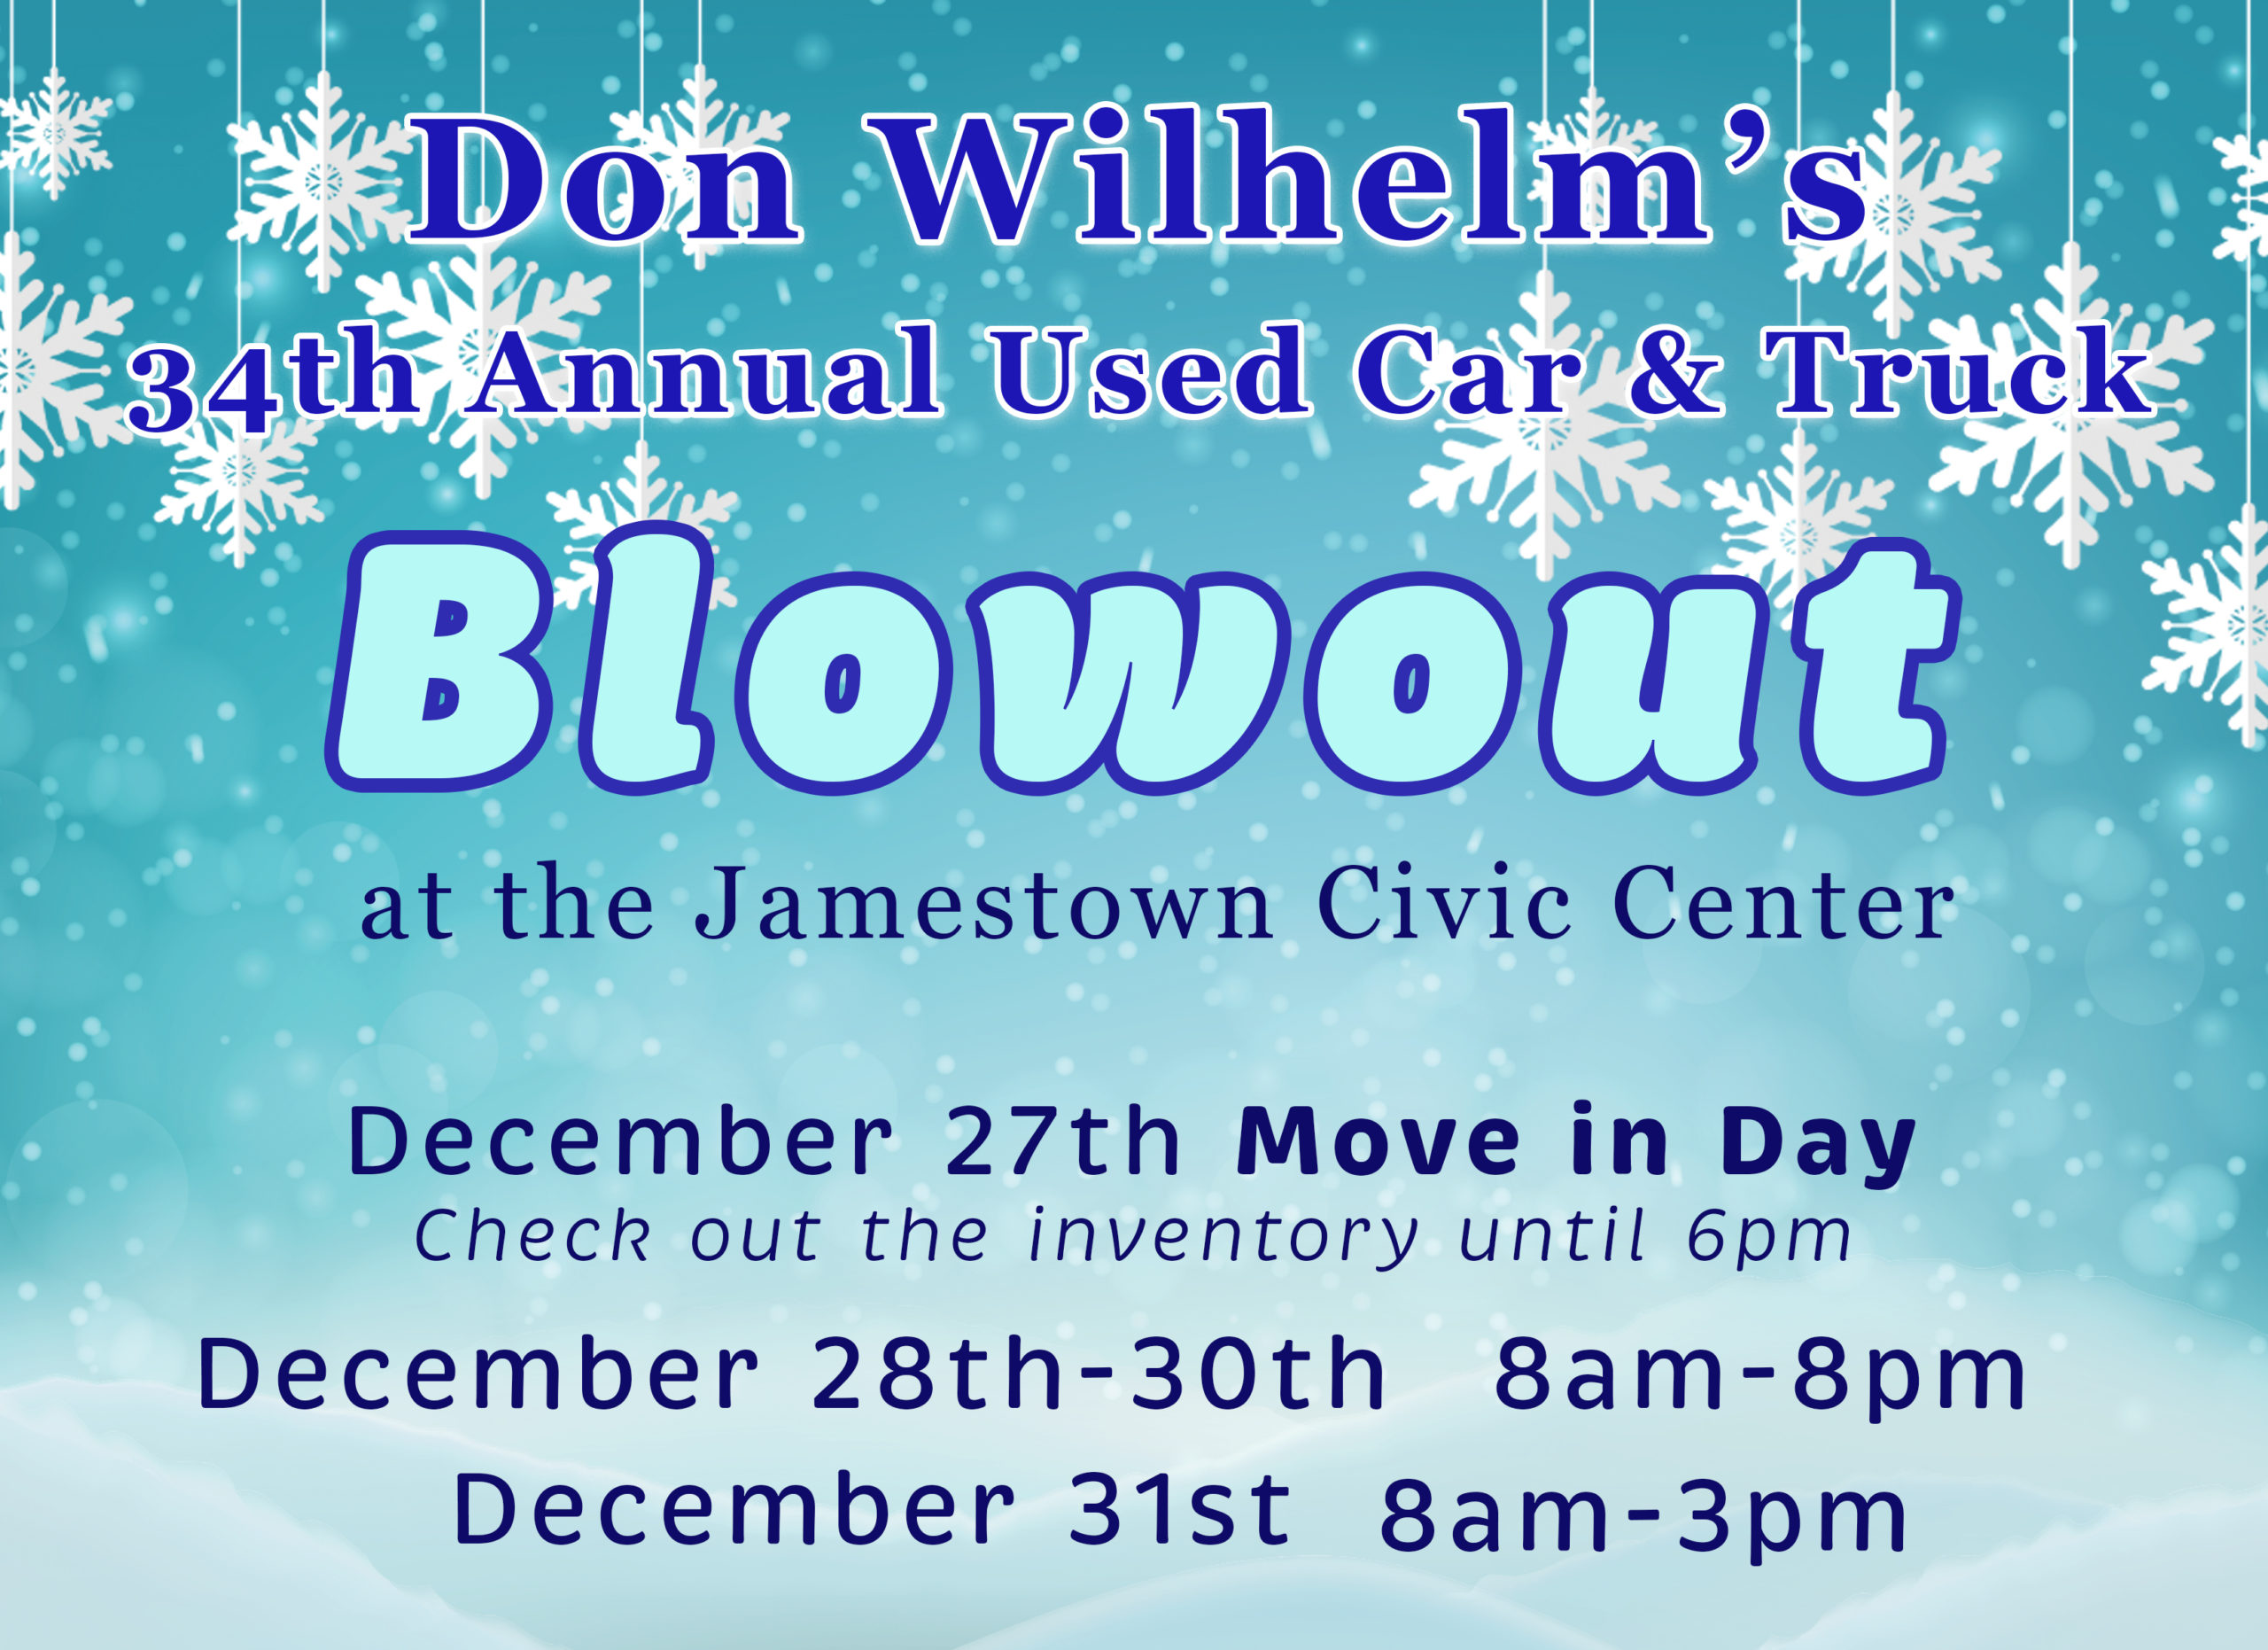 Don Wilhelm’s 34th Annual Used Car & Truck Blowout Jamestown Events